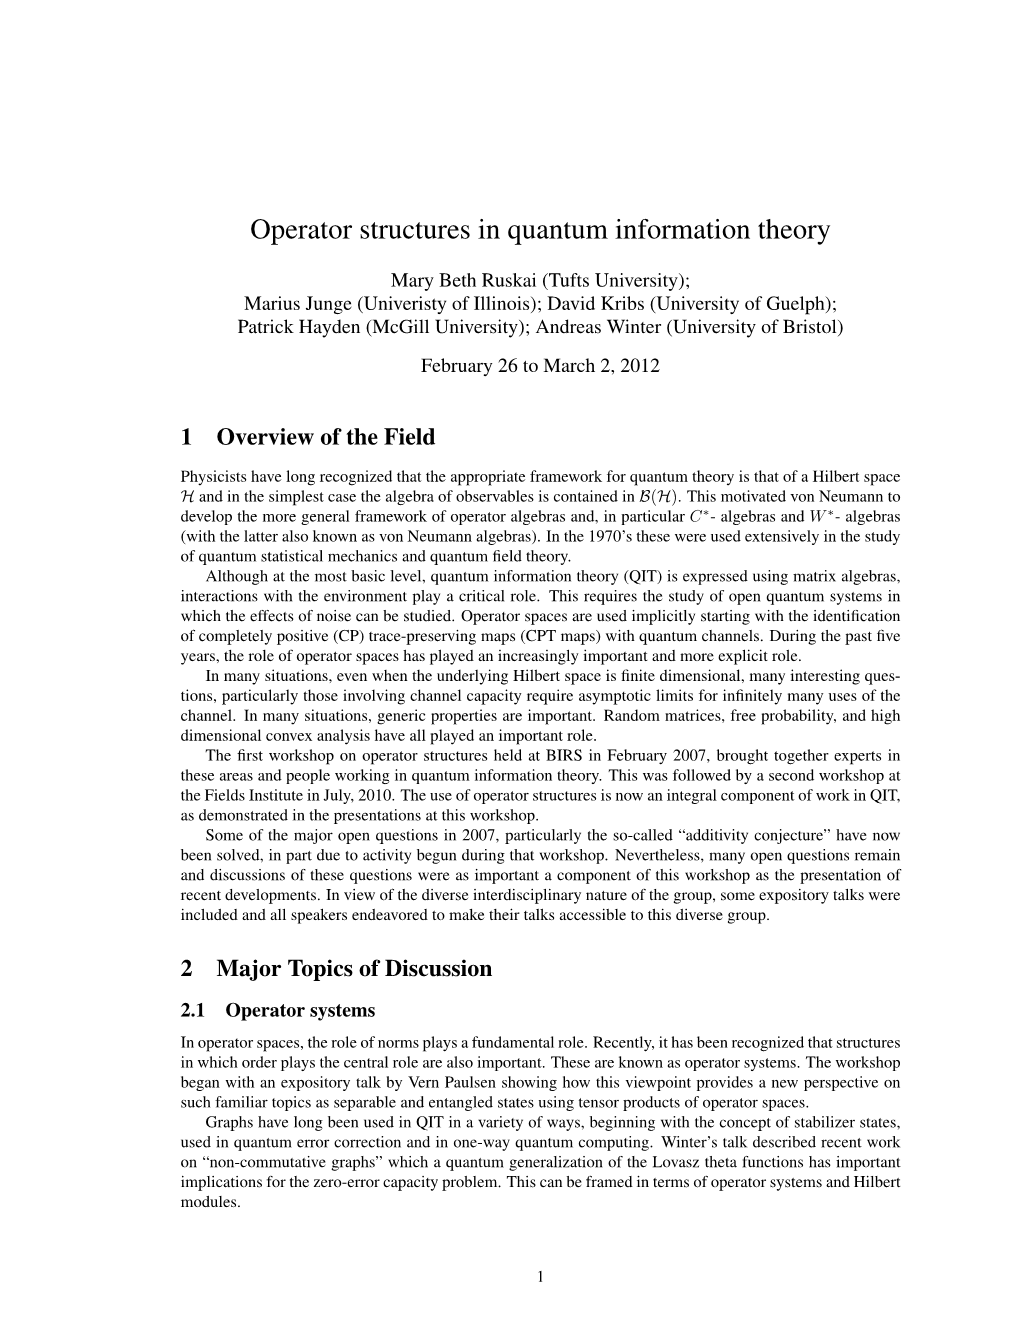 Operator Structures in Quantum Information Theory